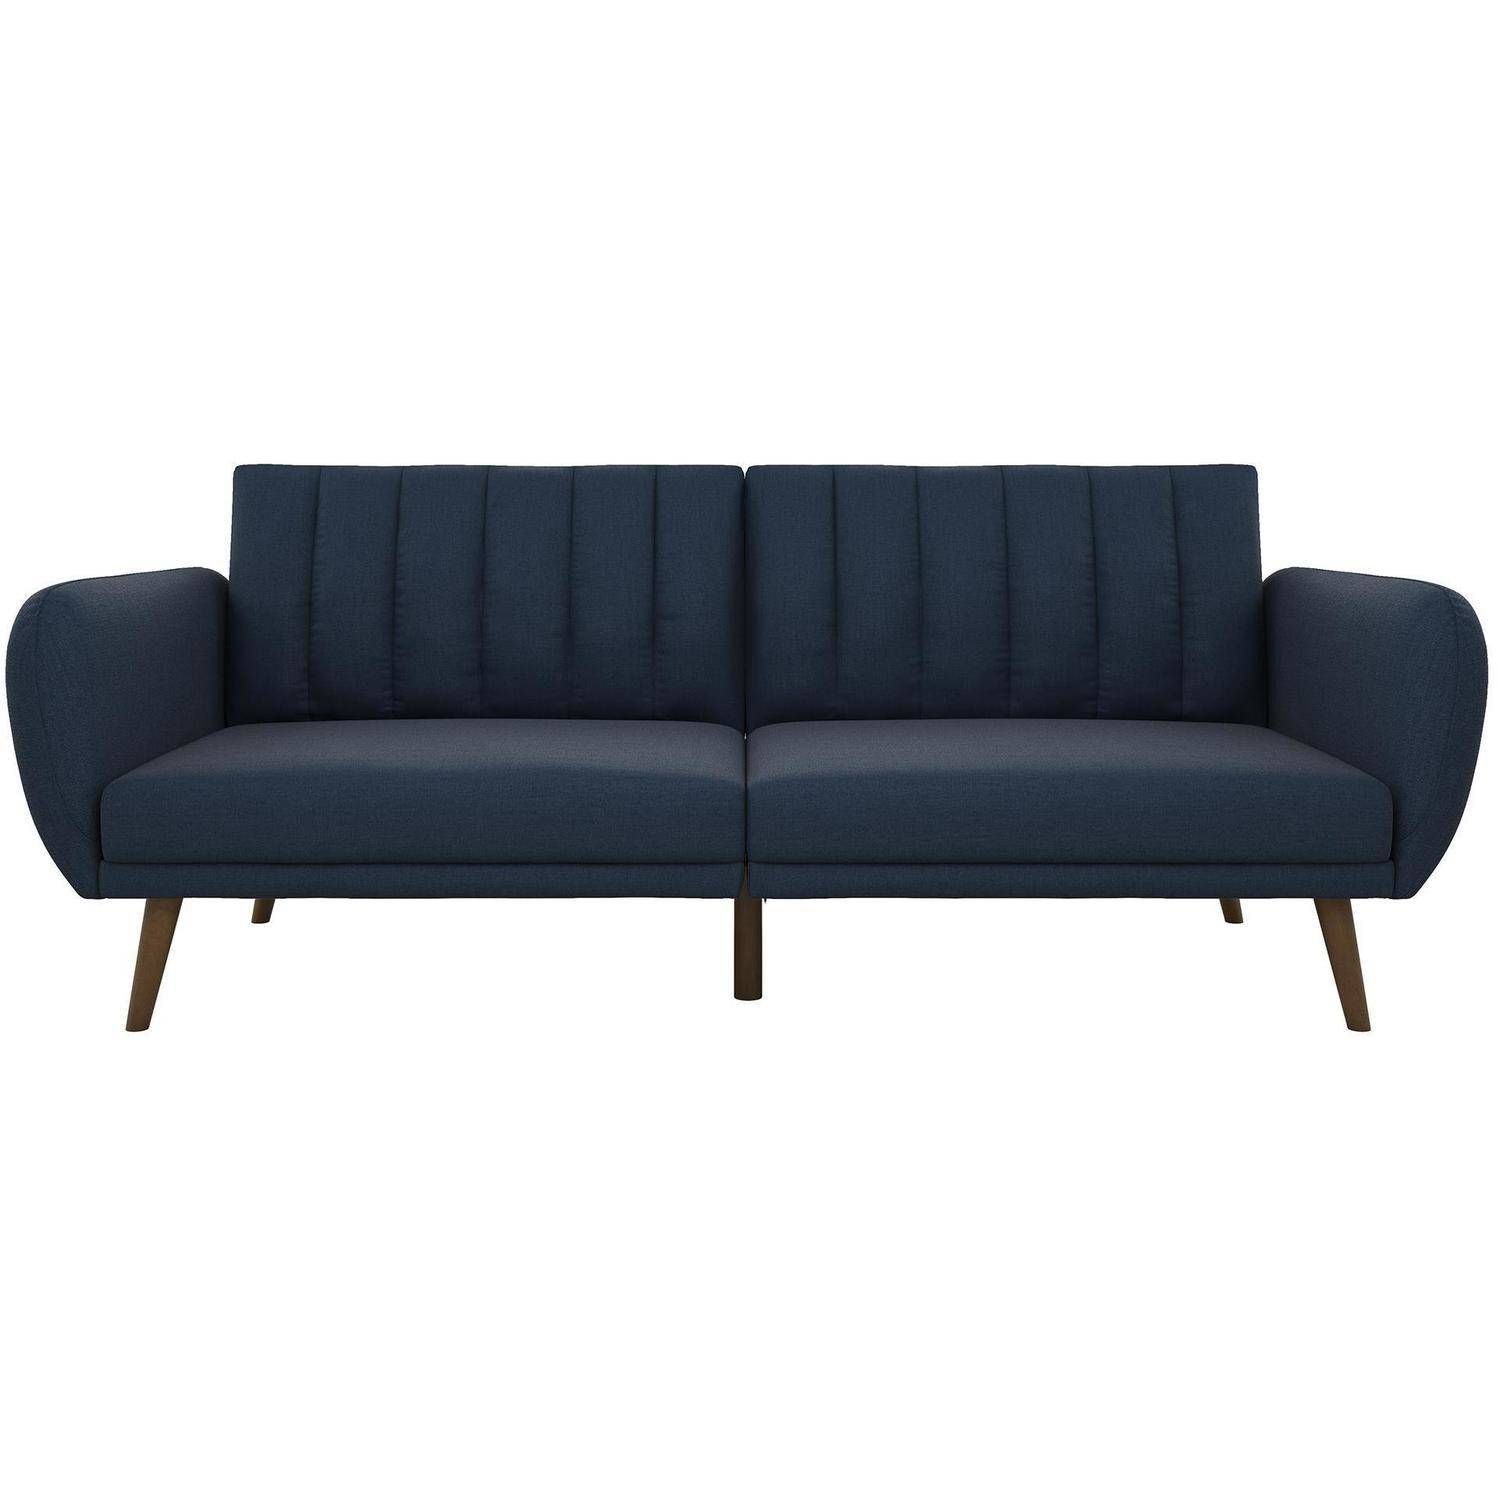 Novogratz Brittany Linen Futon Couch, Multiple Colors Intended For Brittany Sectional Futon Sofas (Photo 5 of 15)